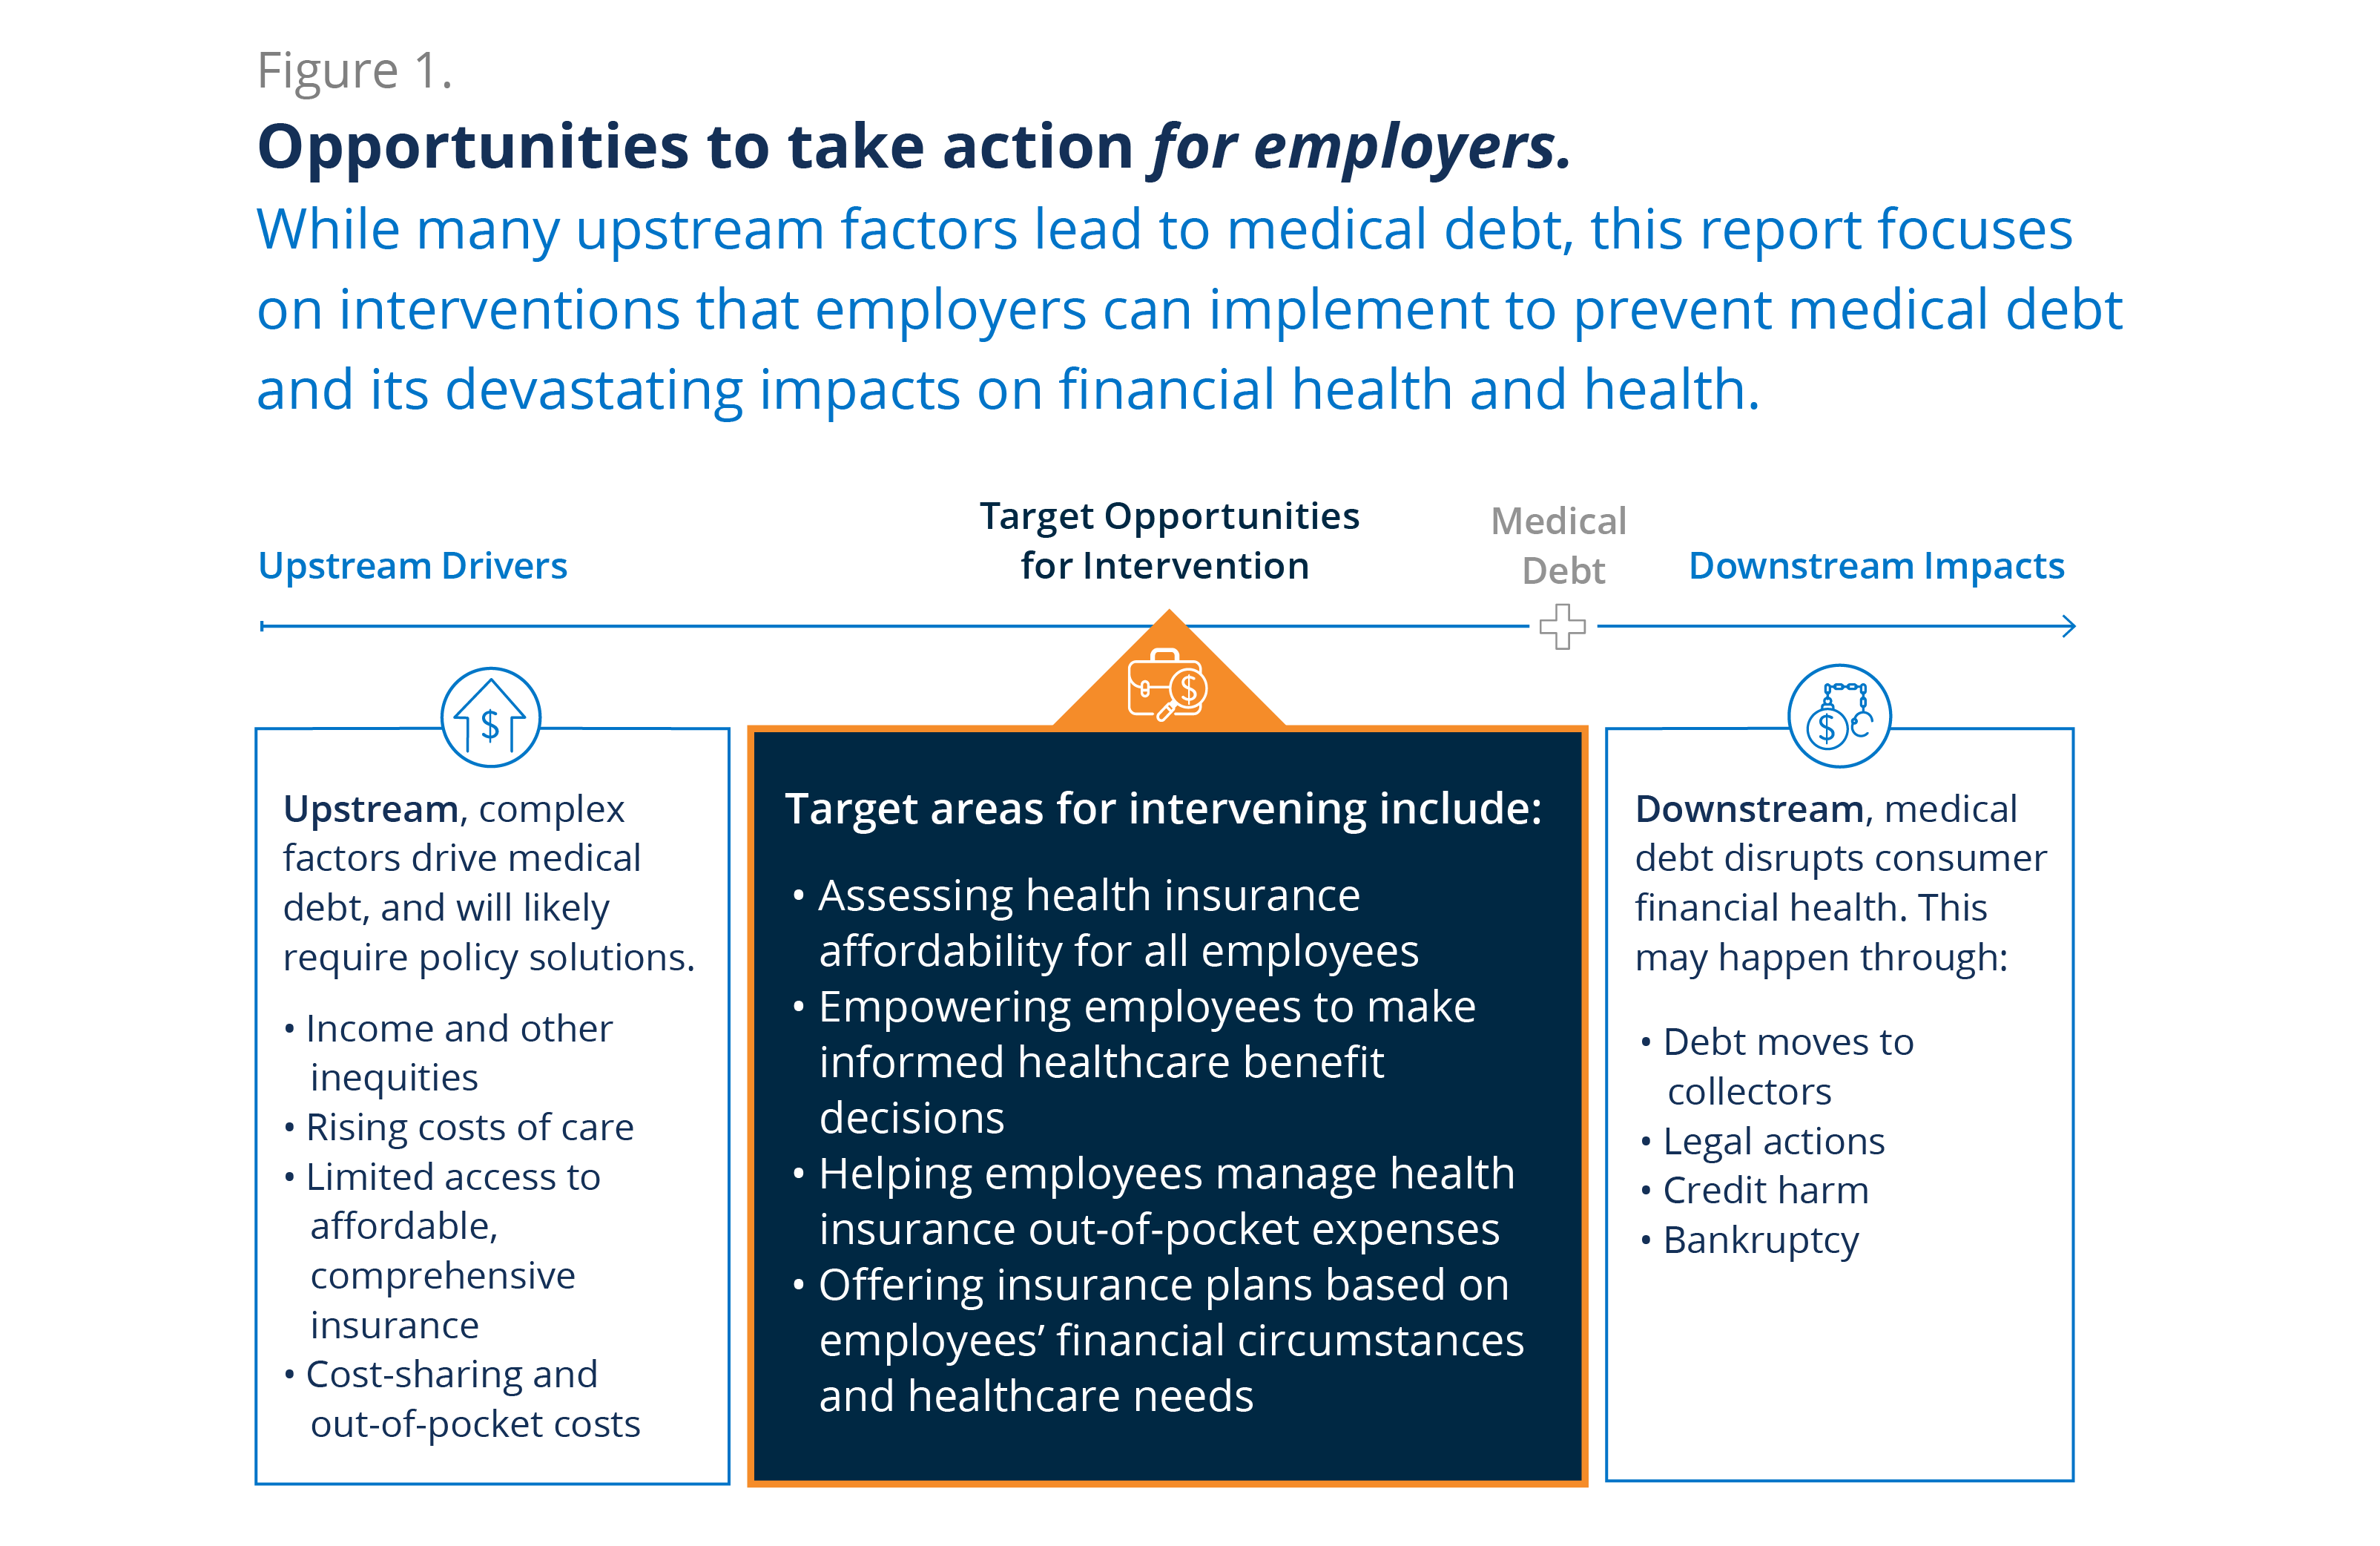 Opportunities to take action for employers - While many upstream factors contribute to medical debt, this report focuses on interventions that employers can implement to prevent medical debt and its devastating impacts on financial health and health